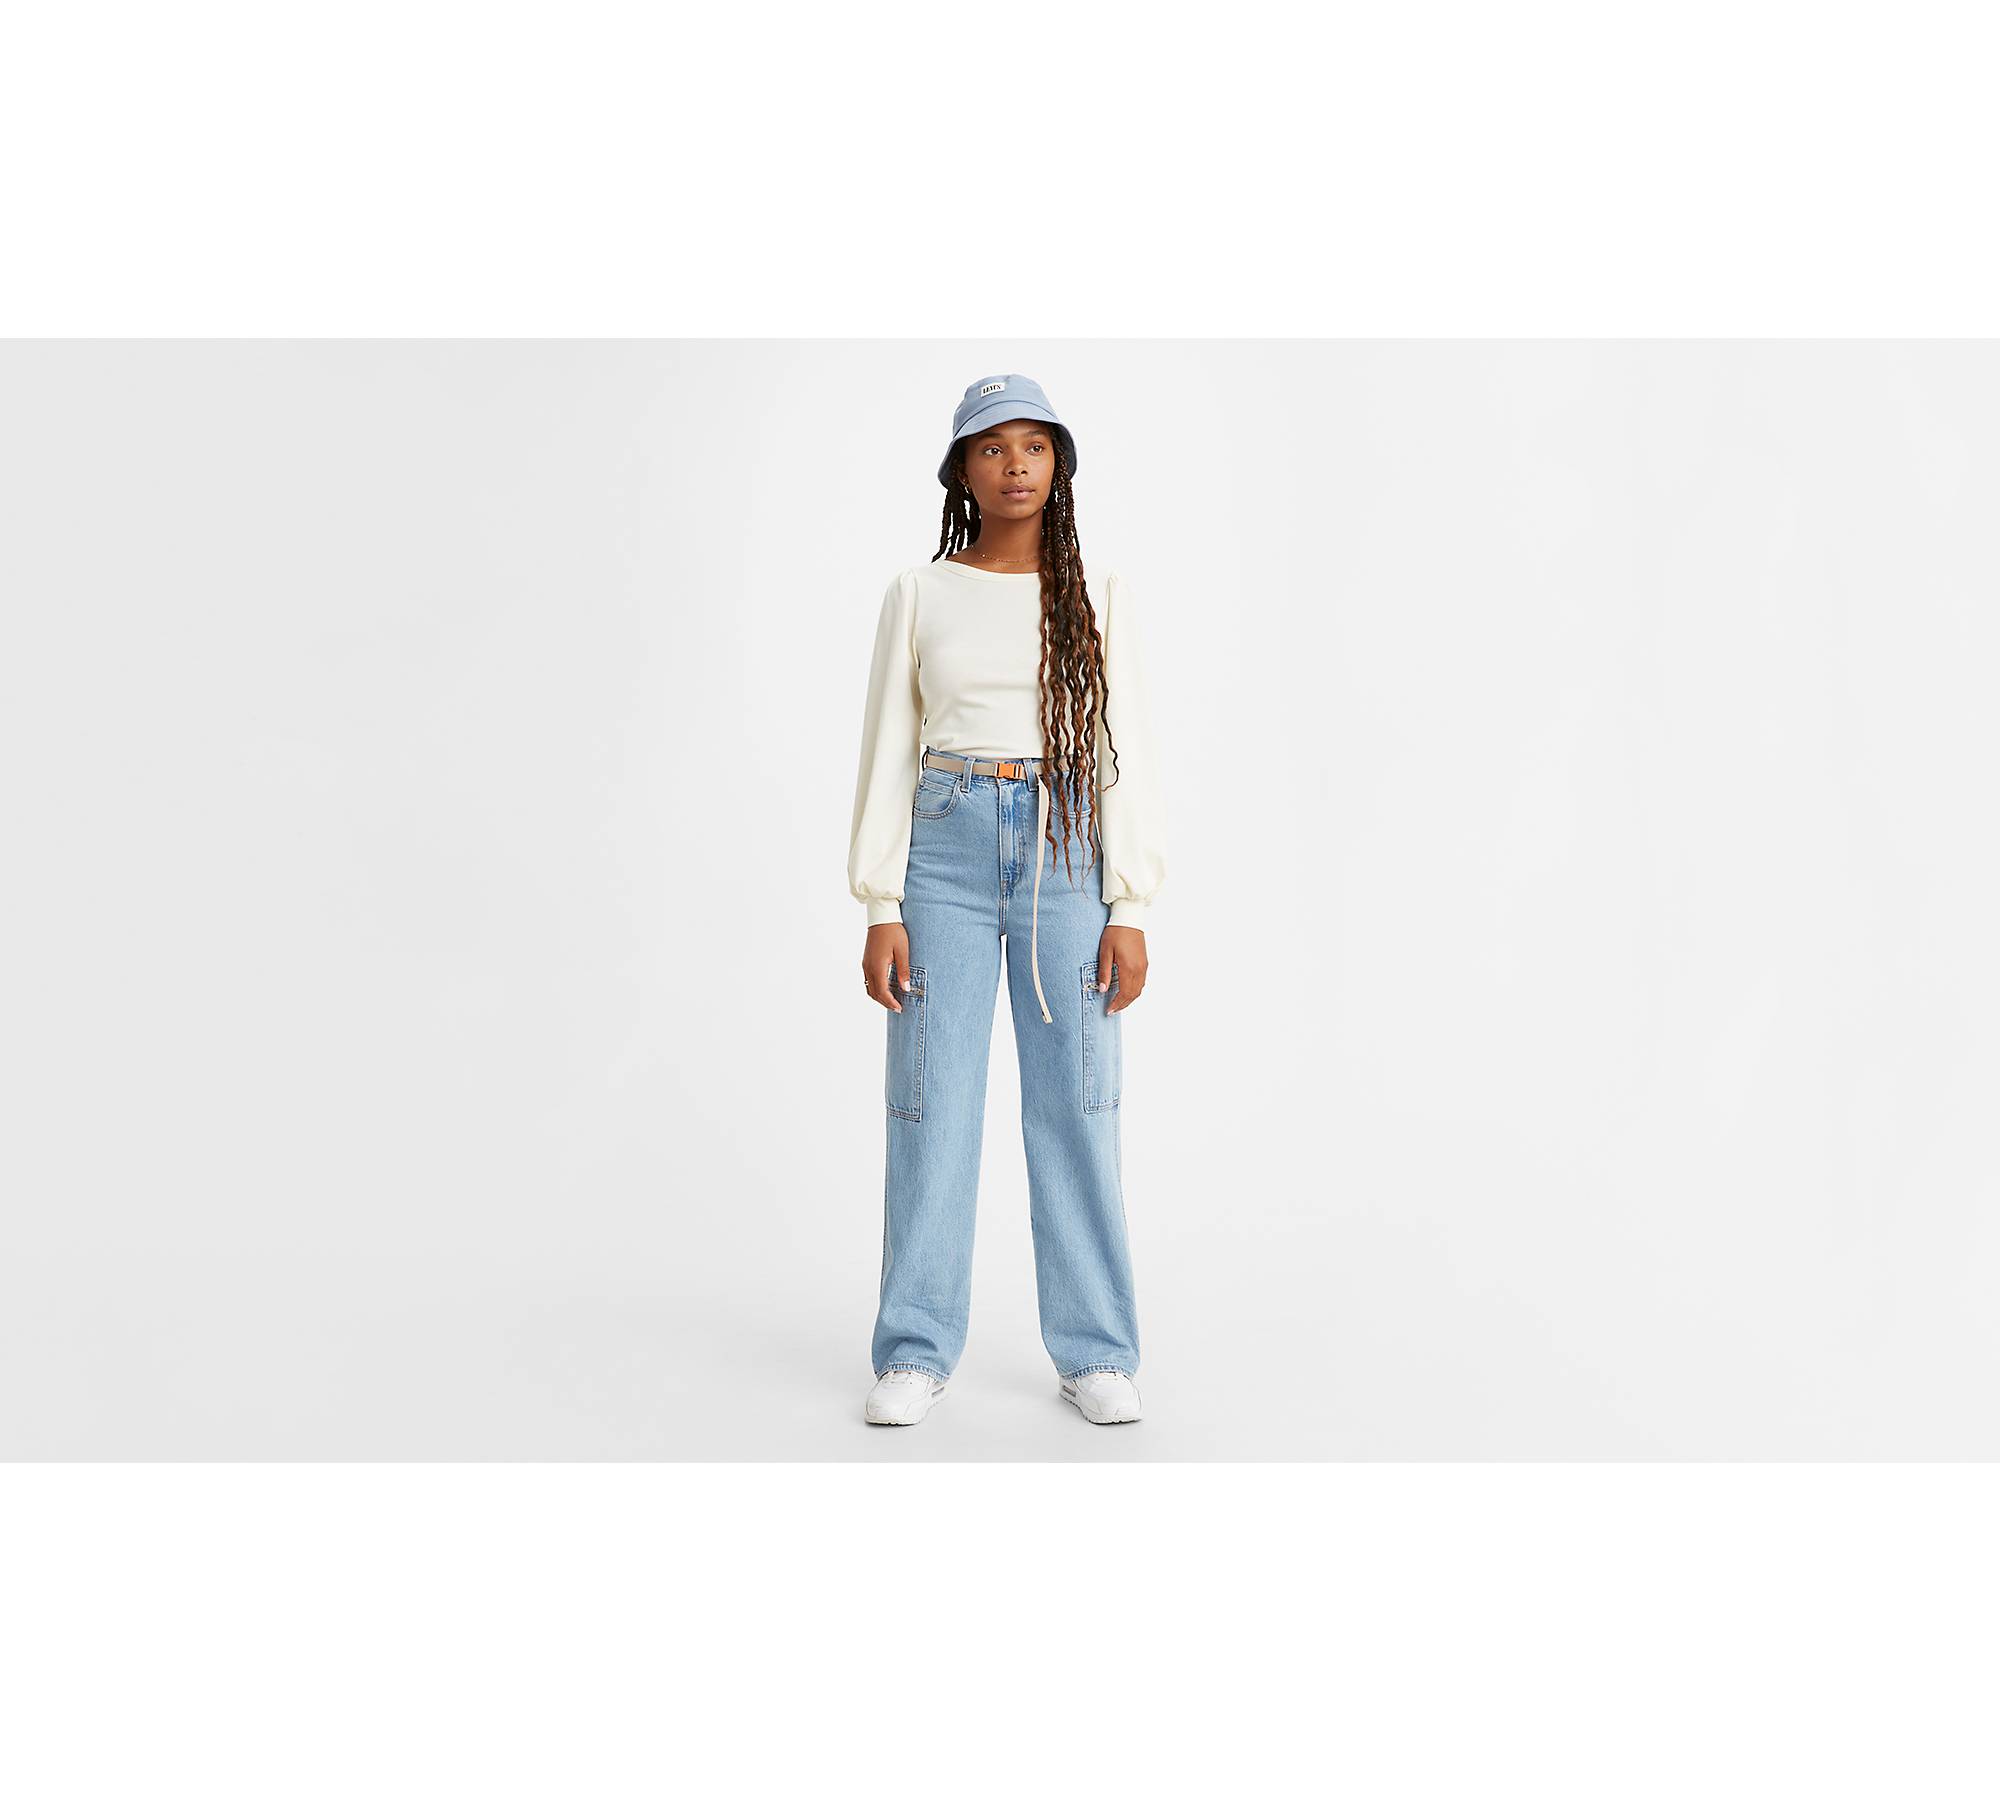 Signature by Levi Strauss & Co. Women's and Women's Plus Heritage